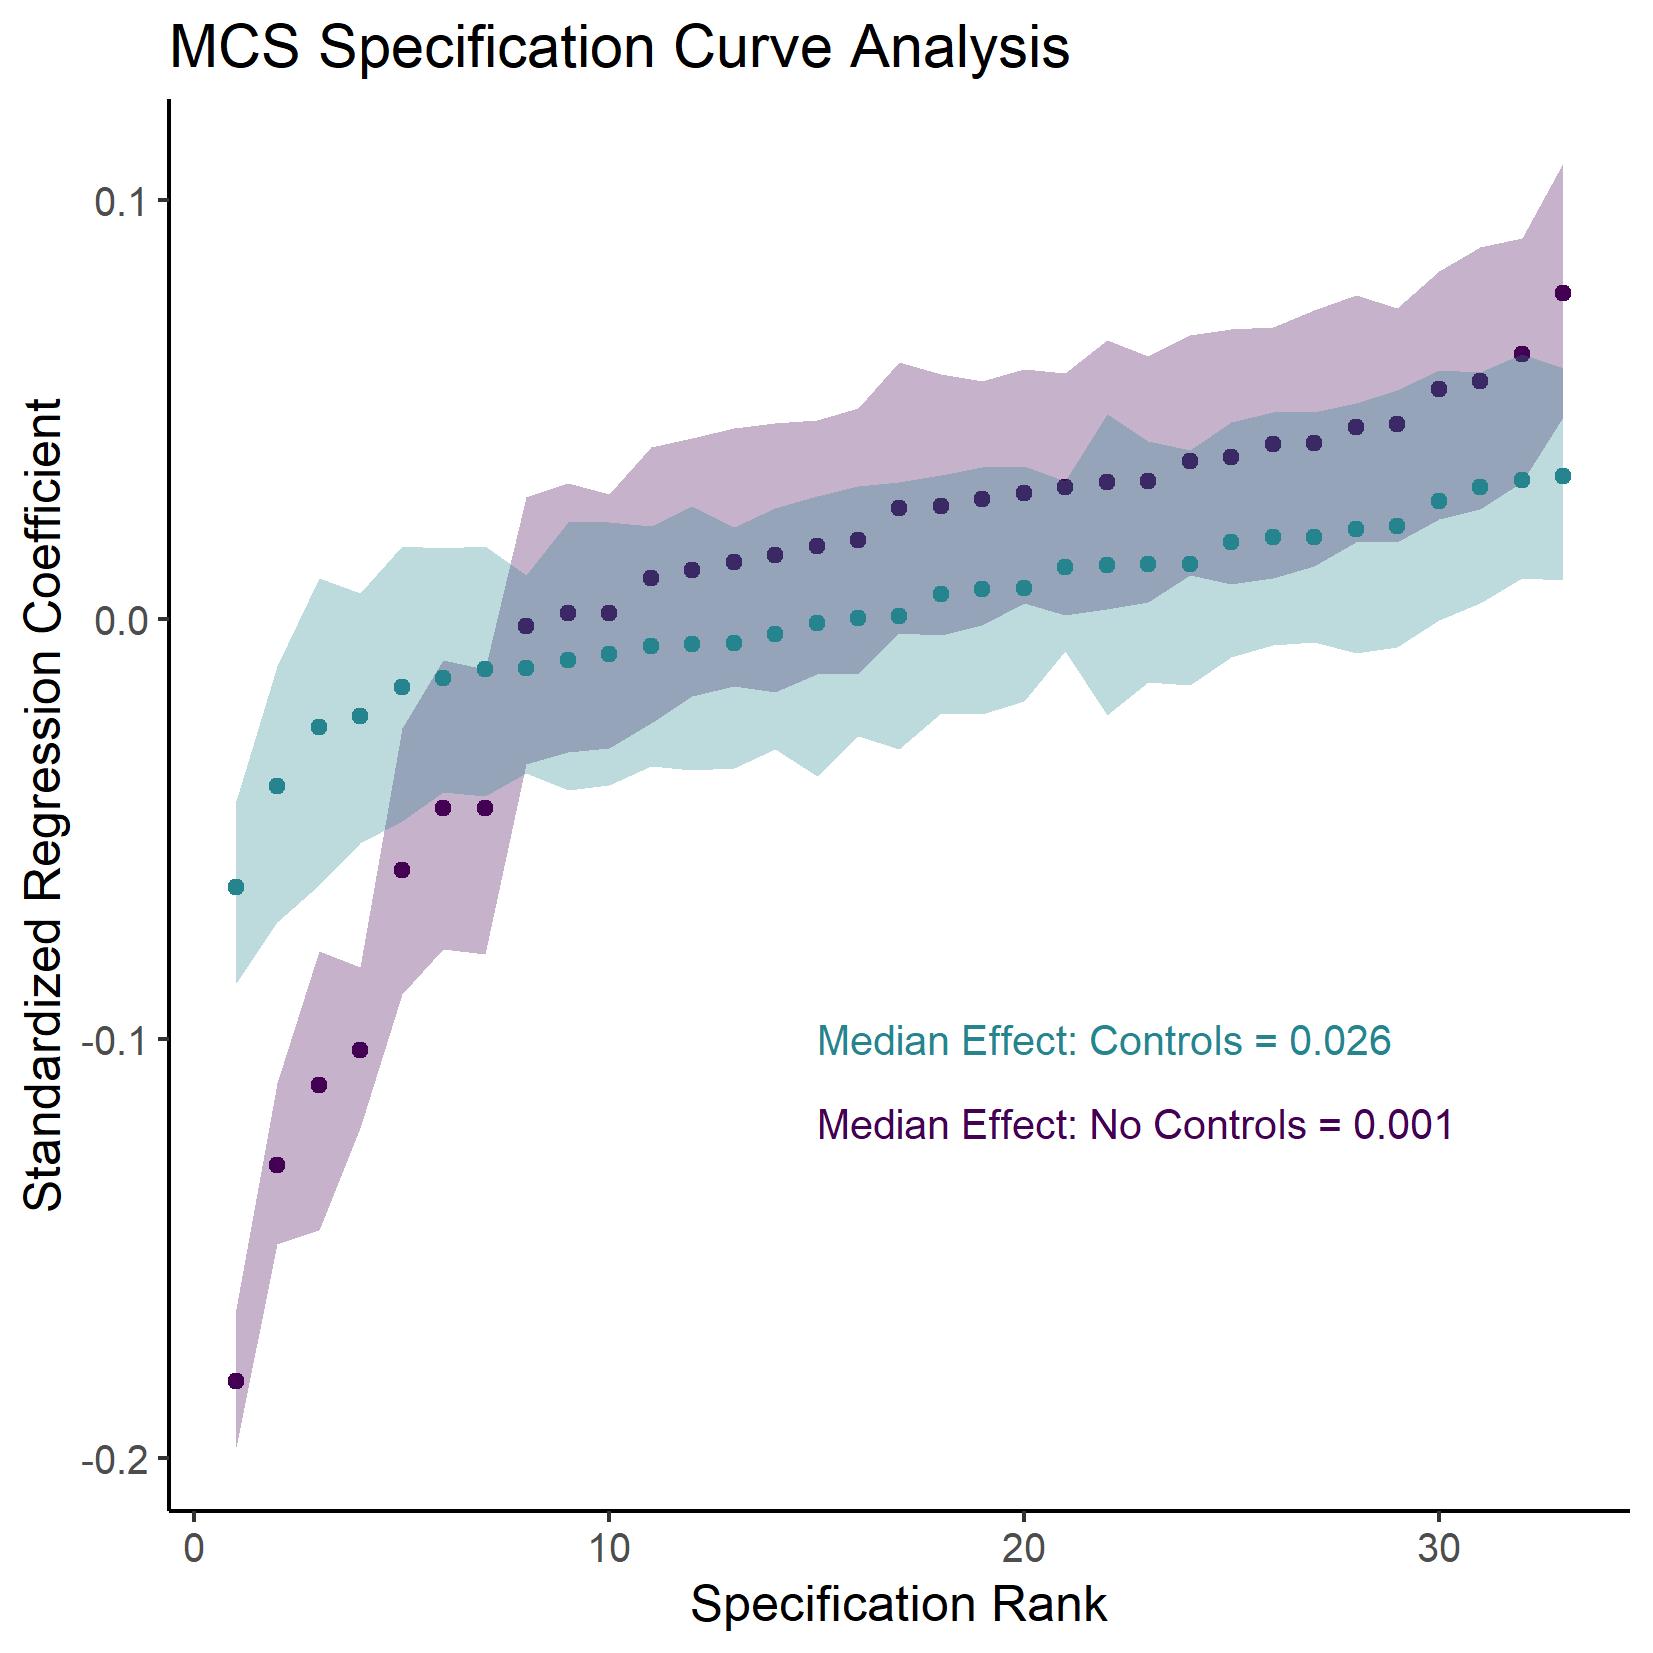 Results of the Specification Curve Analysis for the British data. The curve shows the correlation between digital technology use and adolescent well-being, comparing specifications including controls (teal) and no controls (purple).